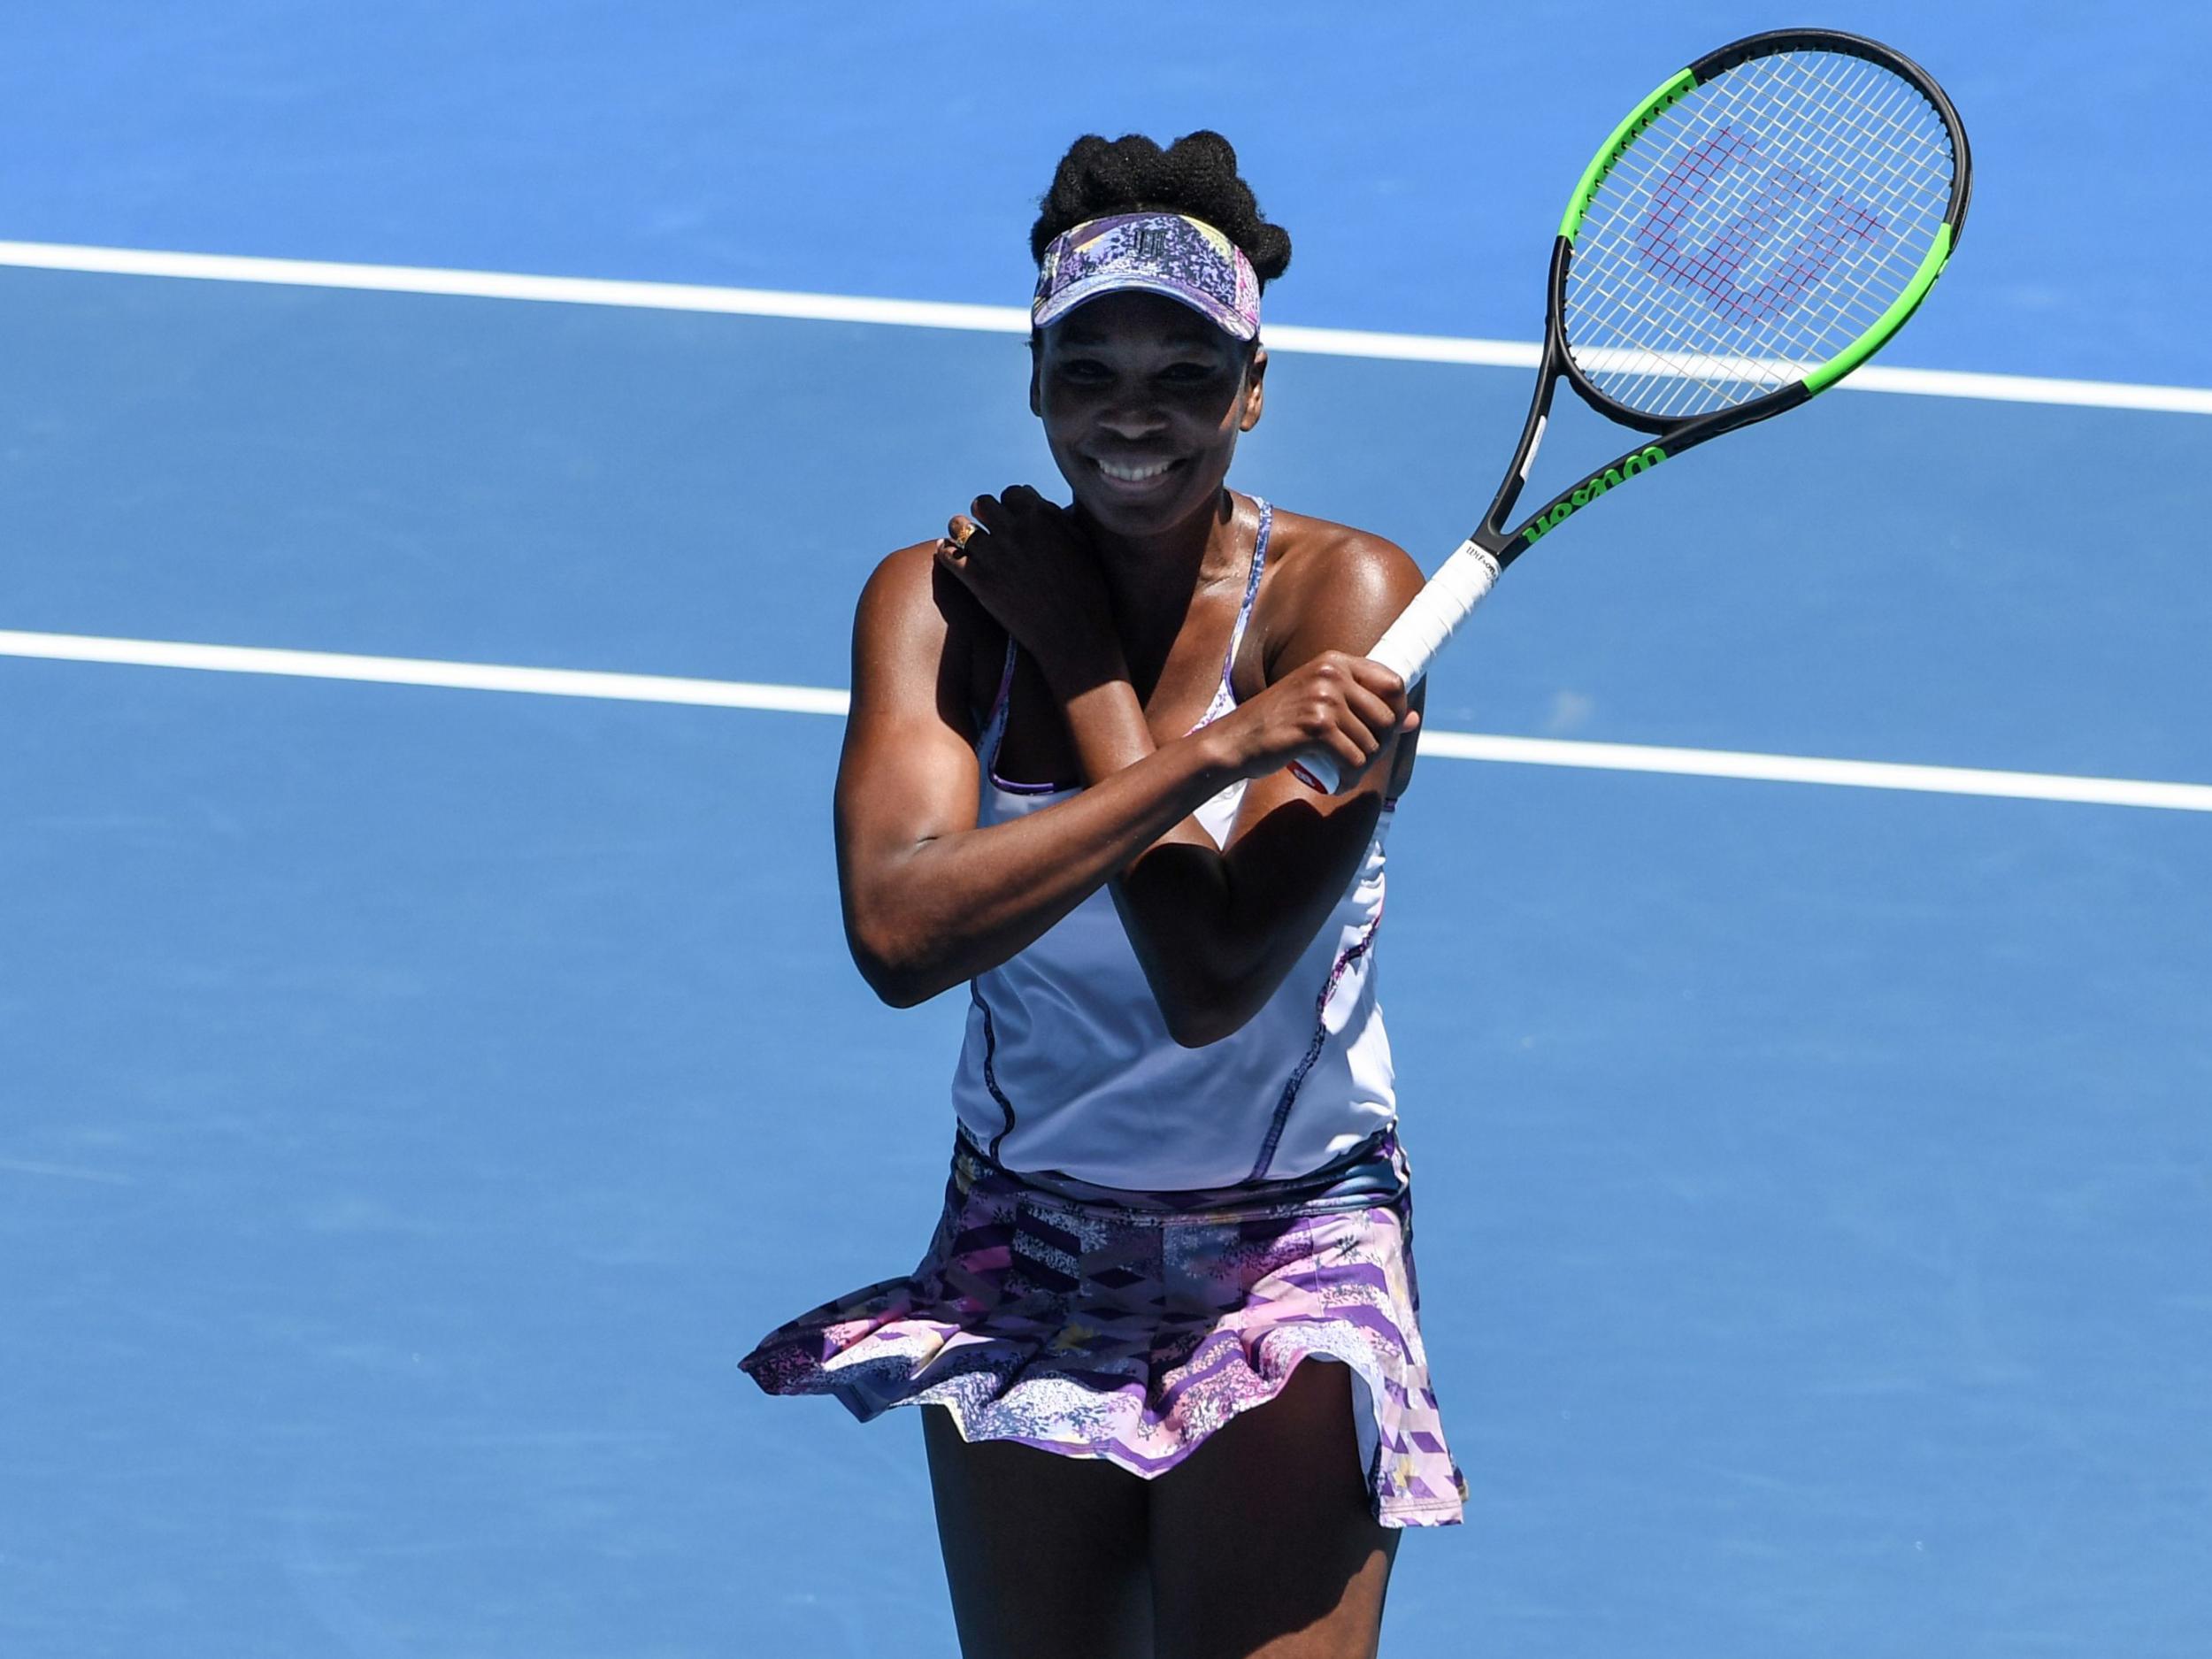 Venus has lost in the third round or earlier at the Australian Open in five of her last seven attempts